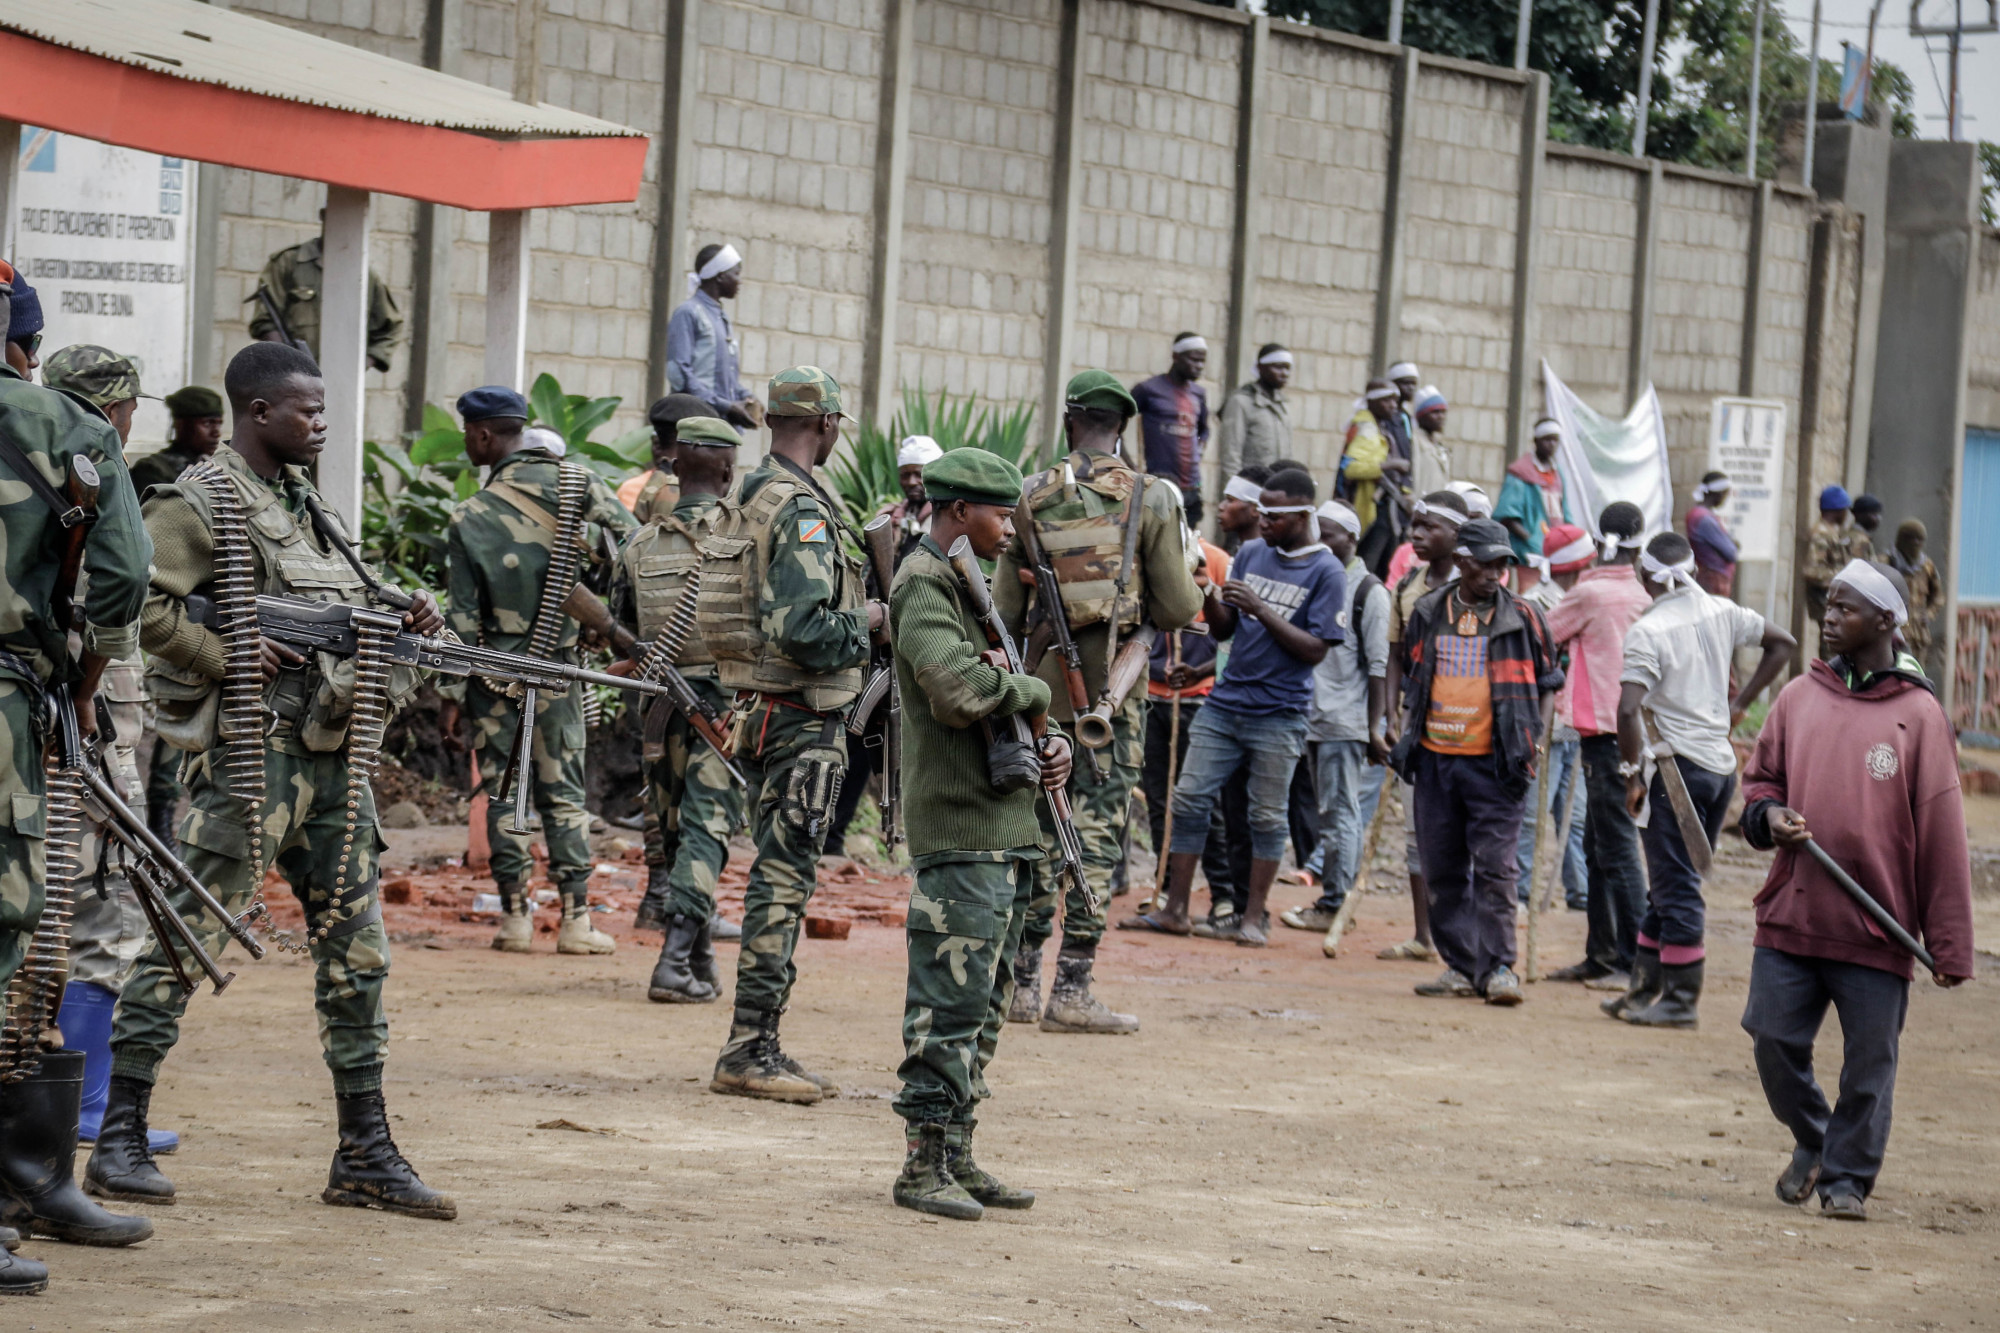 Bunia, DRC, September 4, 2020. Government soldiers take up positions between a crowd of youths angry that 100 heavily armed militiamen were able to enter the eastern Congolese city of Bunia last Friday. © Dieudonné Dirole for Fondation Carmignac